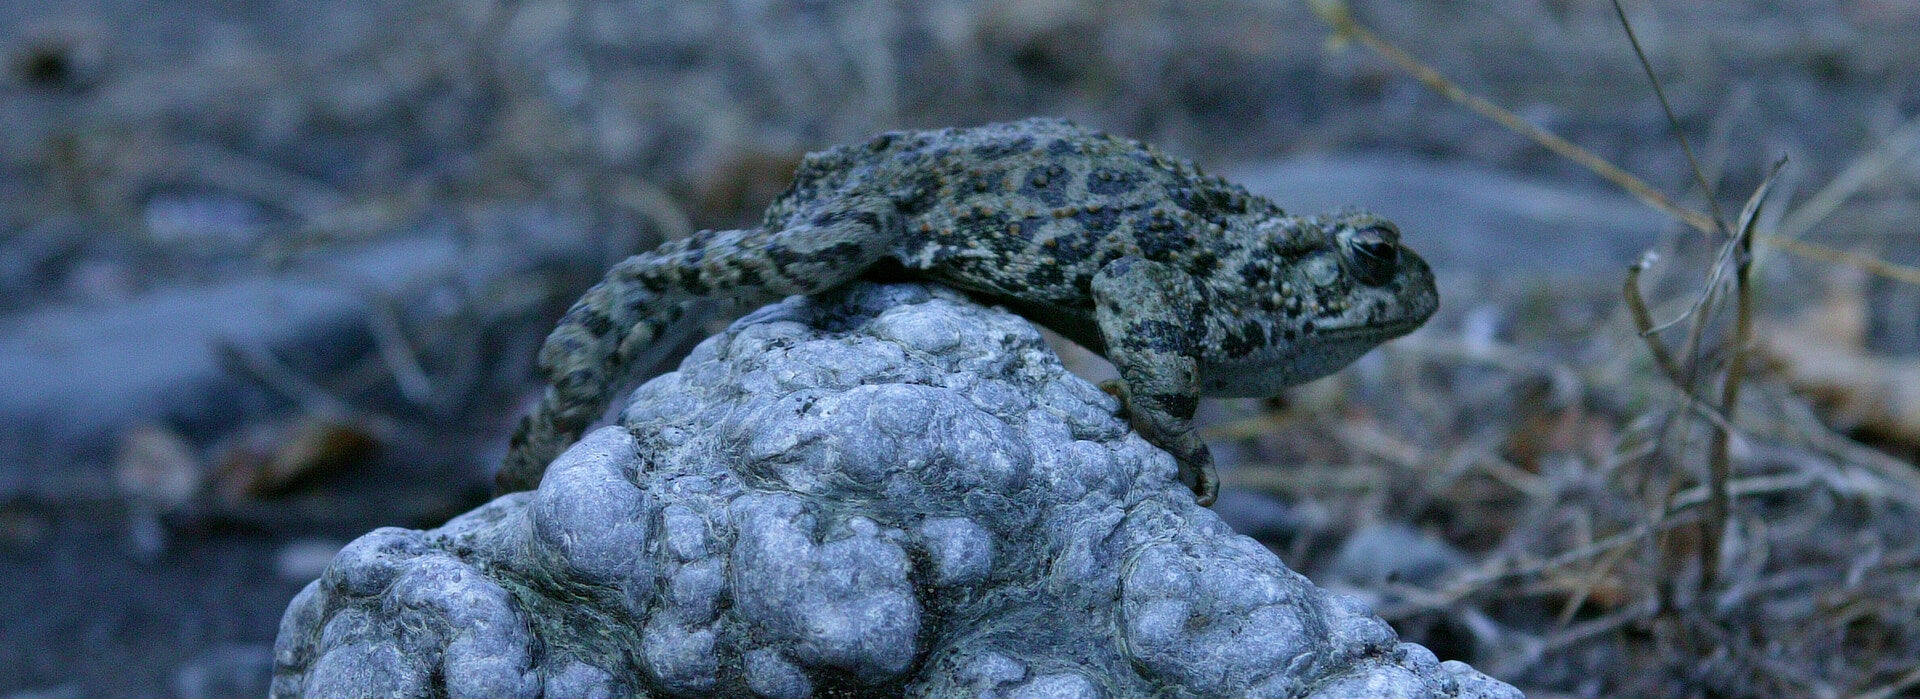 Frog resting on botryoidal jade nugget in remote Trinity Mountain wilderness, California